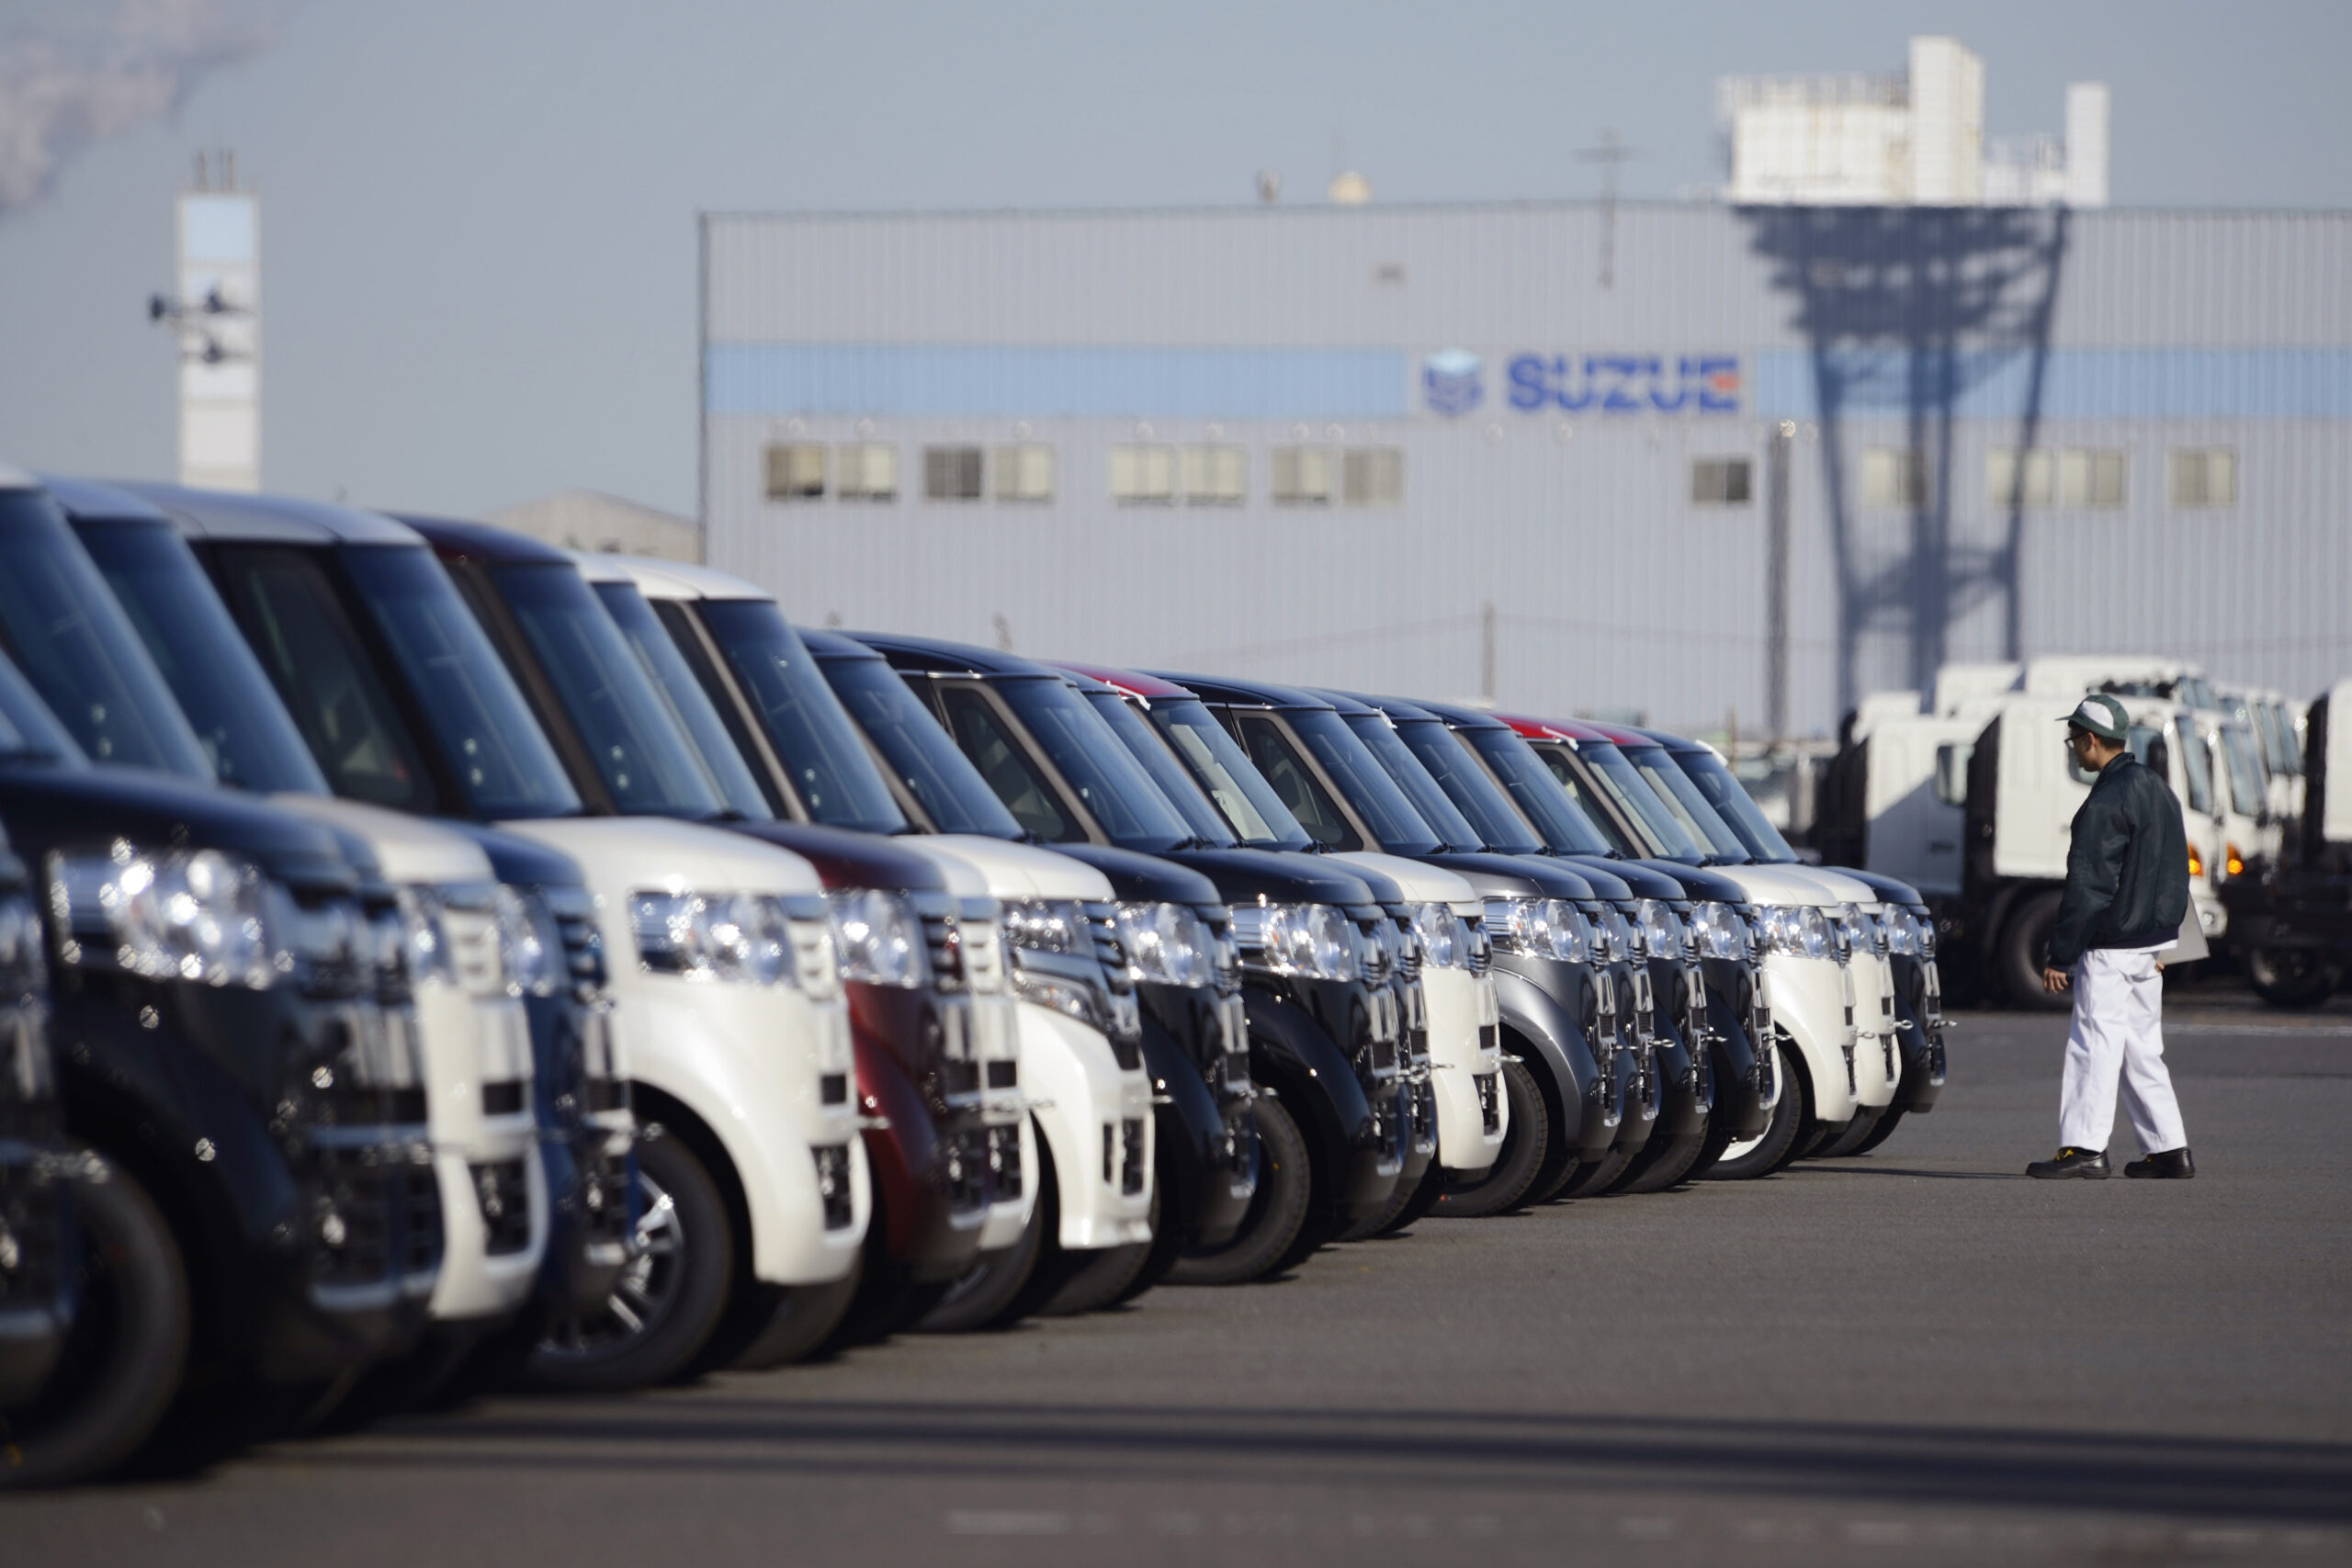 Used car prices start to fall in Japan